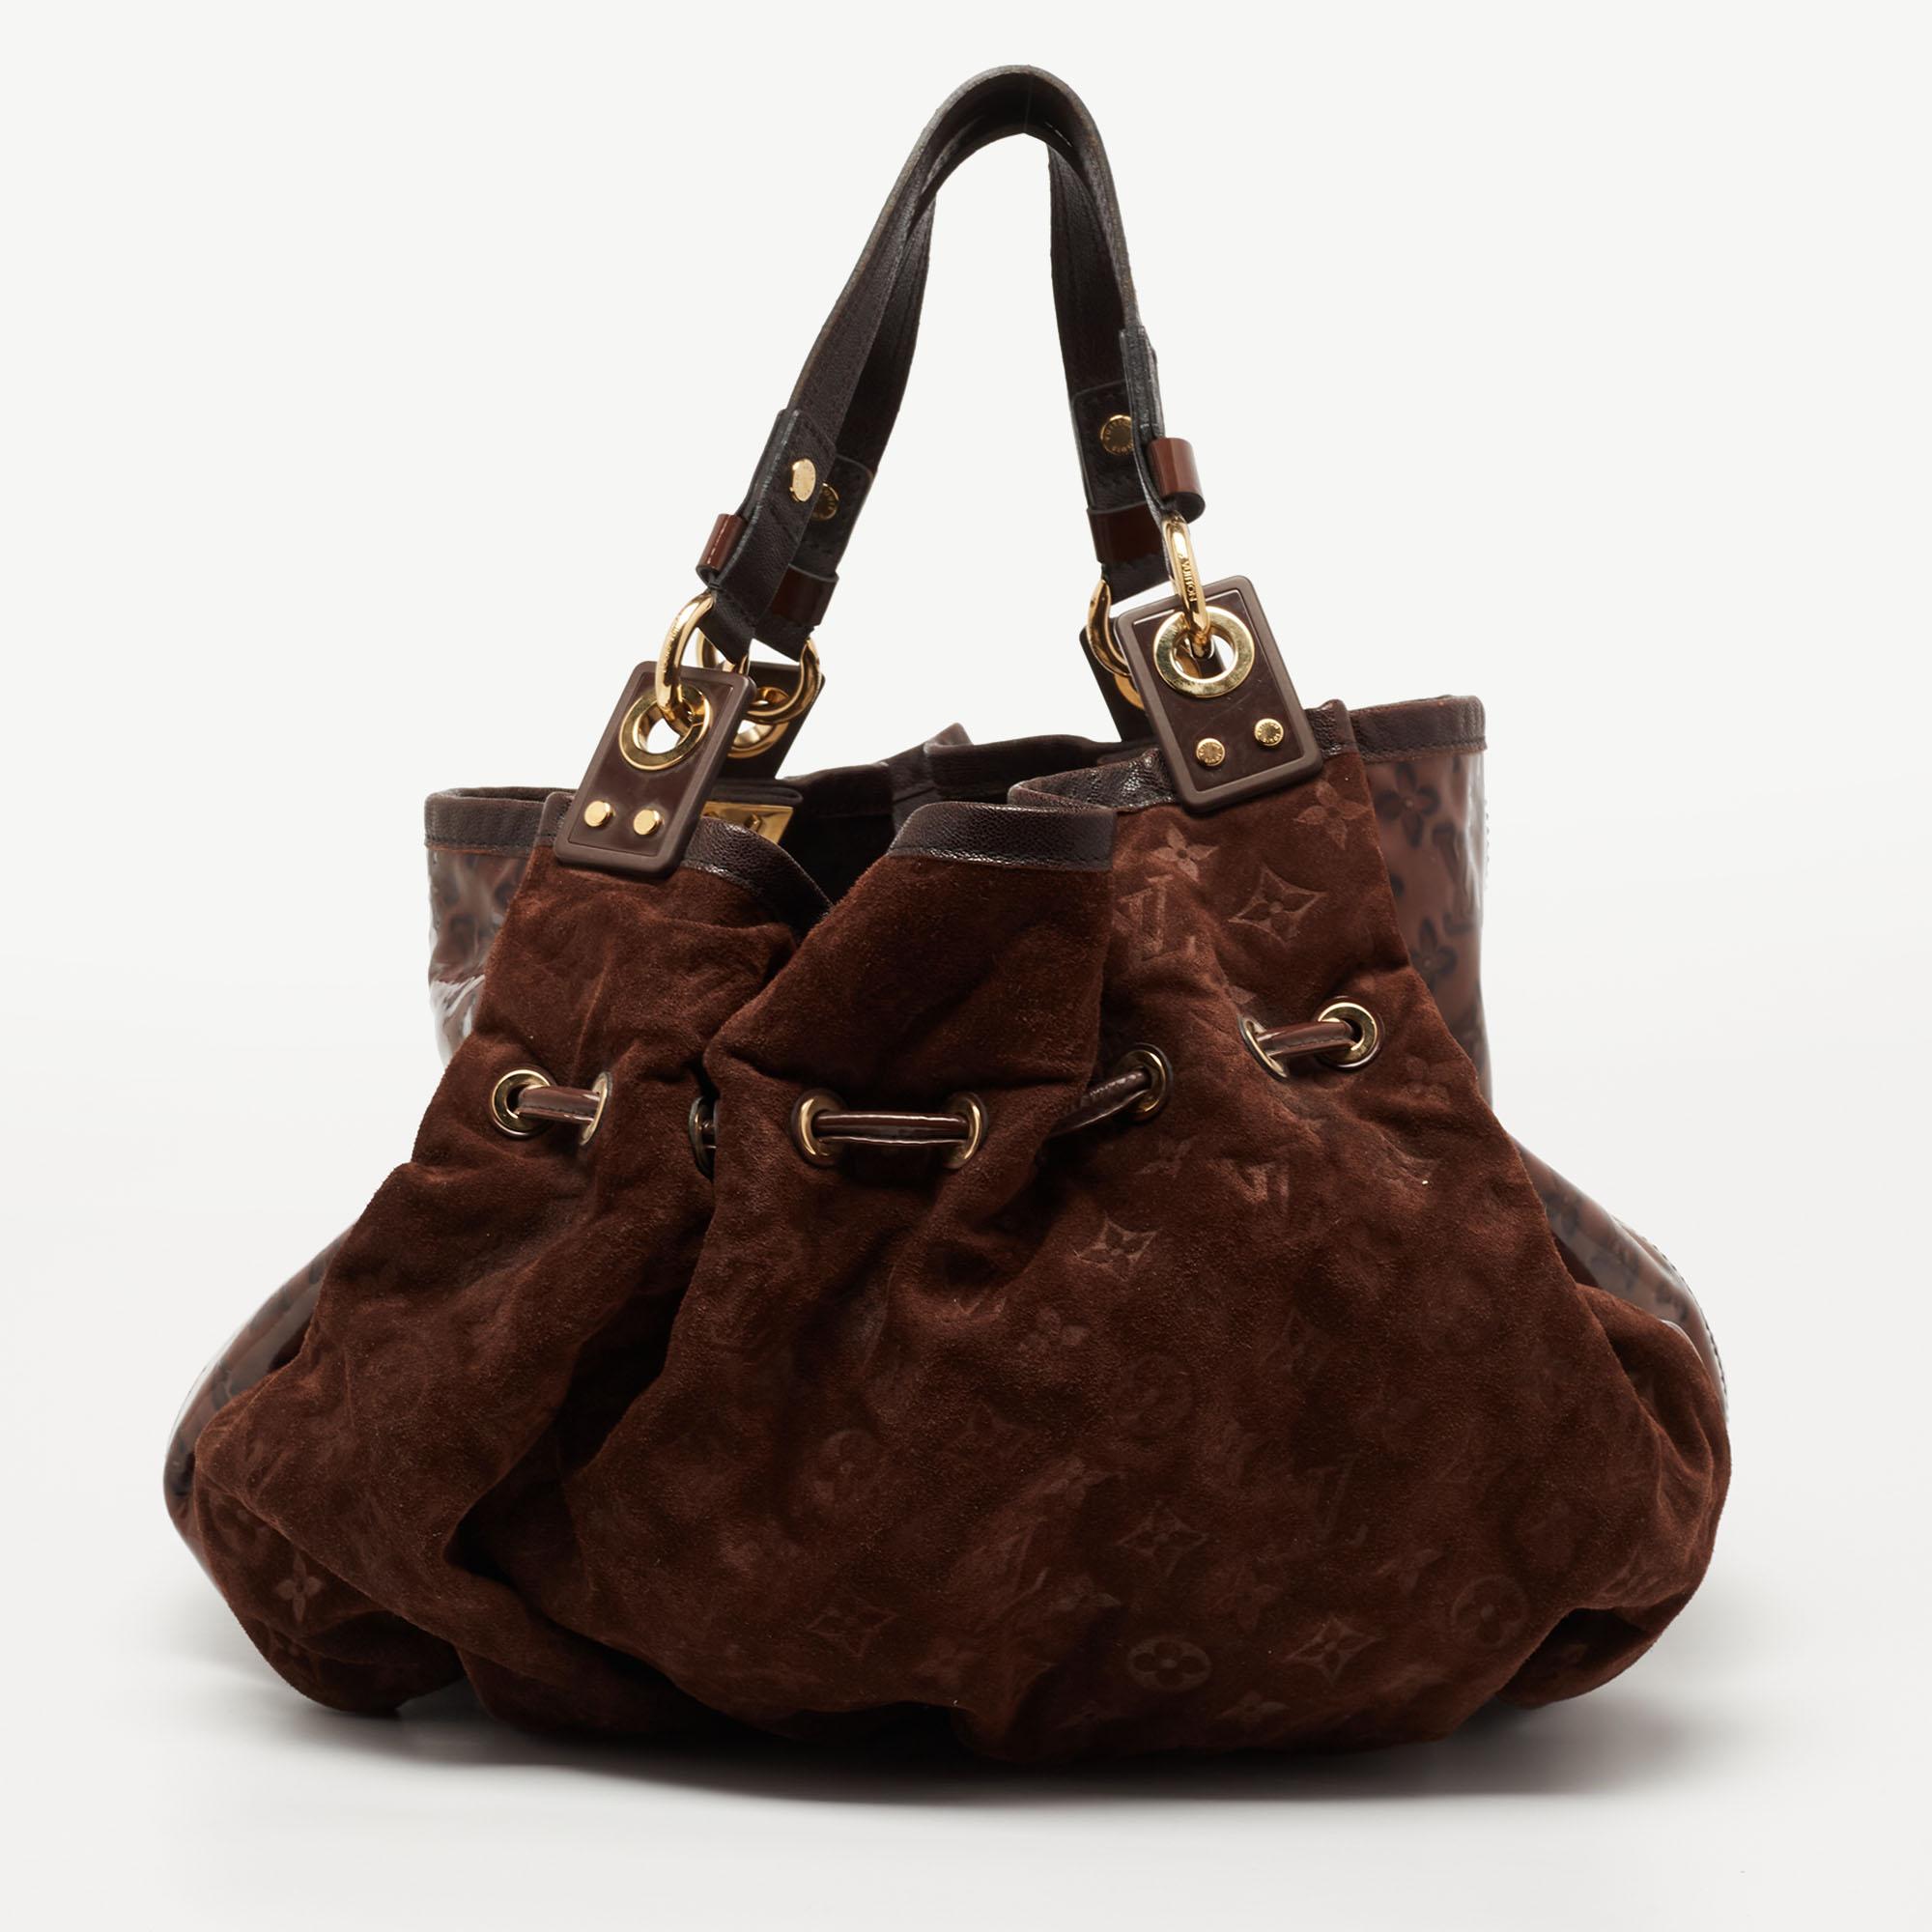 Let this exclusive piece be yours! This Louis Vuitton limited edition Irene bag has been crafted from monogram suede and lined with Alcantara inside. Its exterior has a drawstring detailing and patent leather trims. The top leads way to a spacious